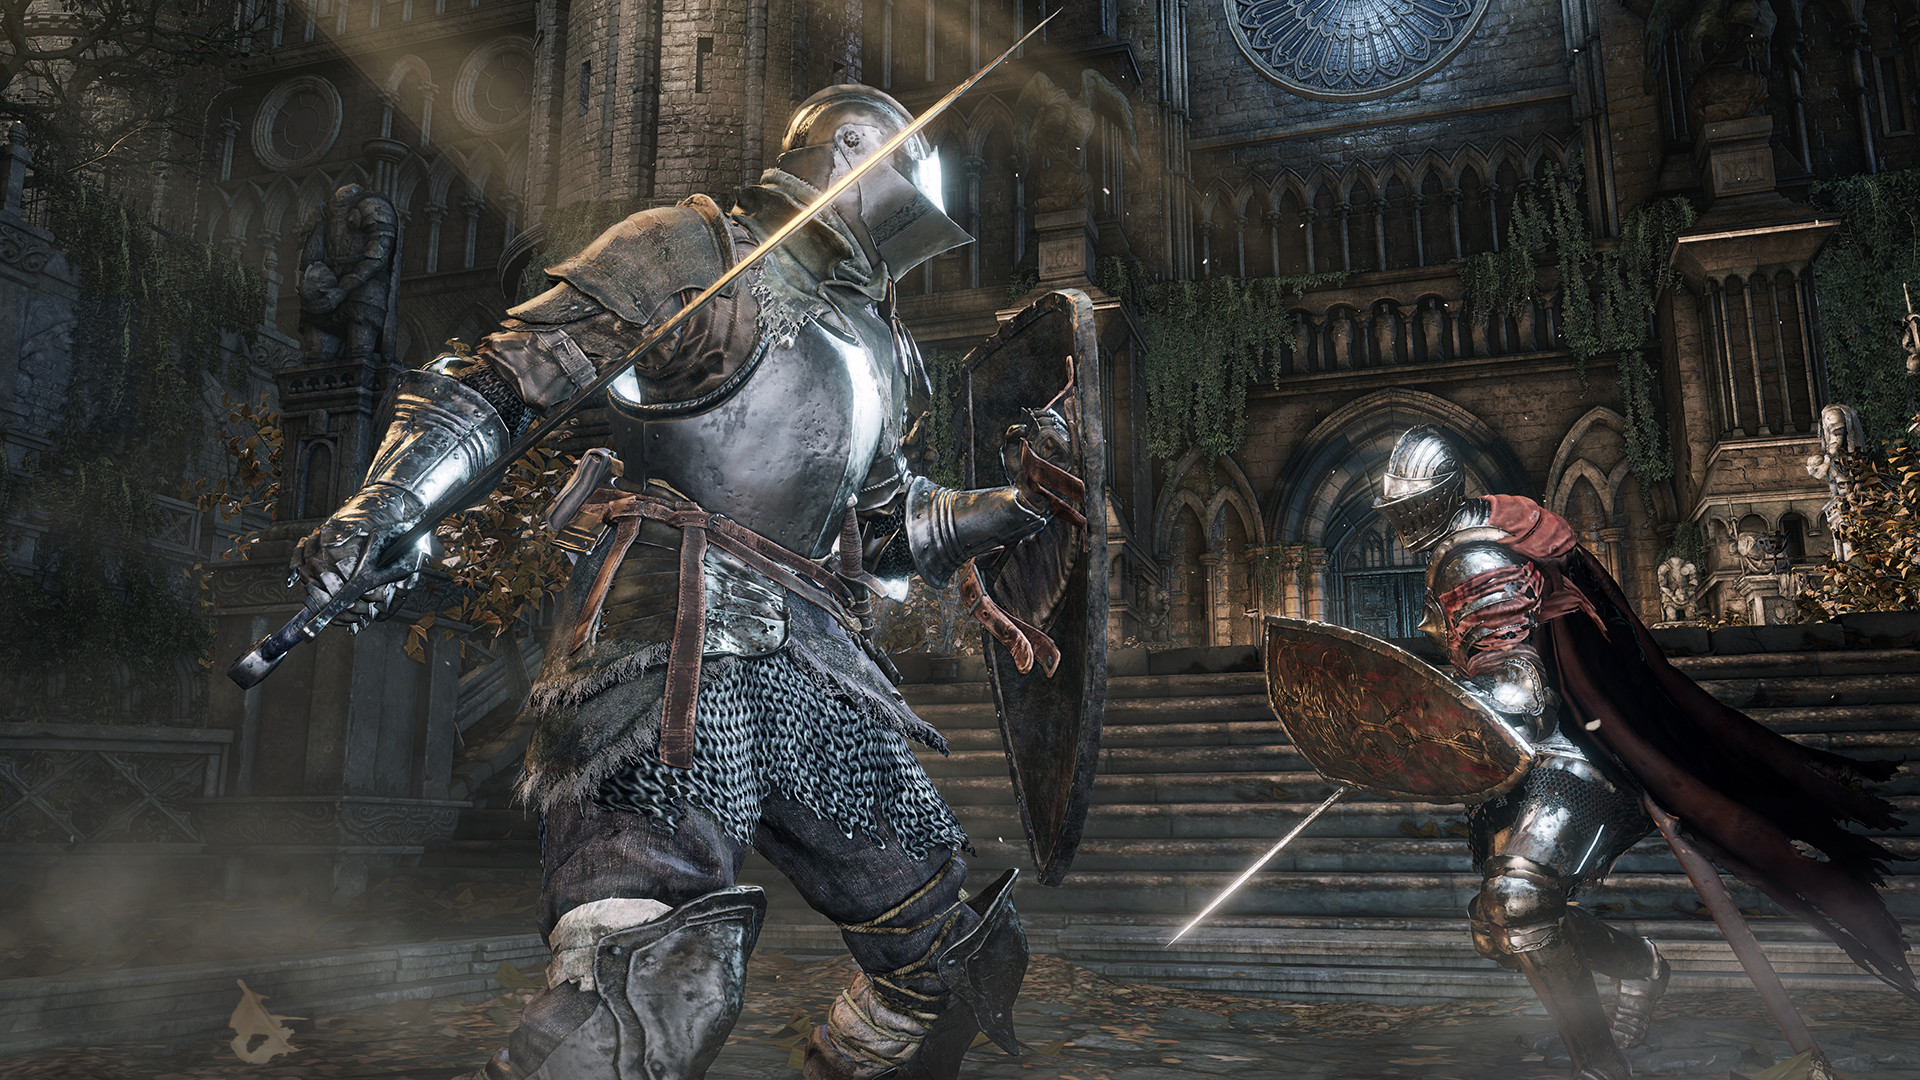 Dark Souls 3 private server announces tournament for May 22